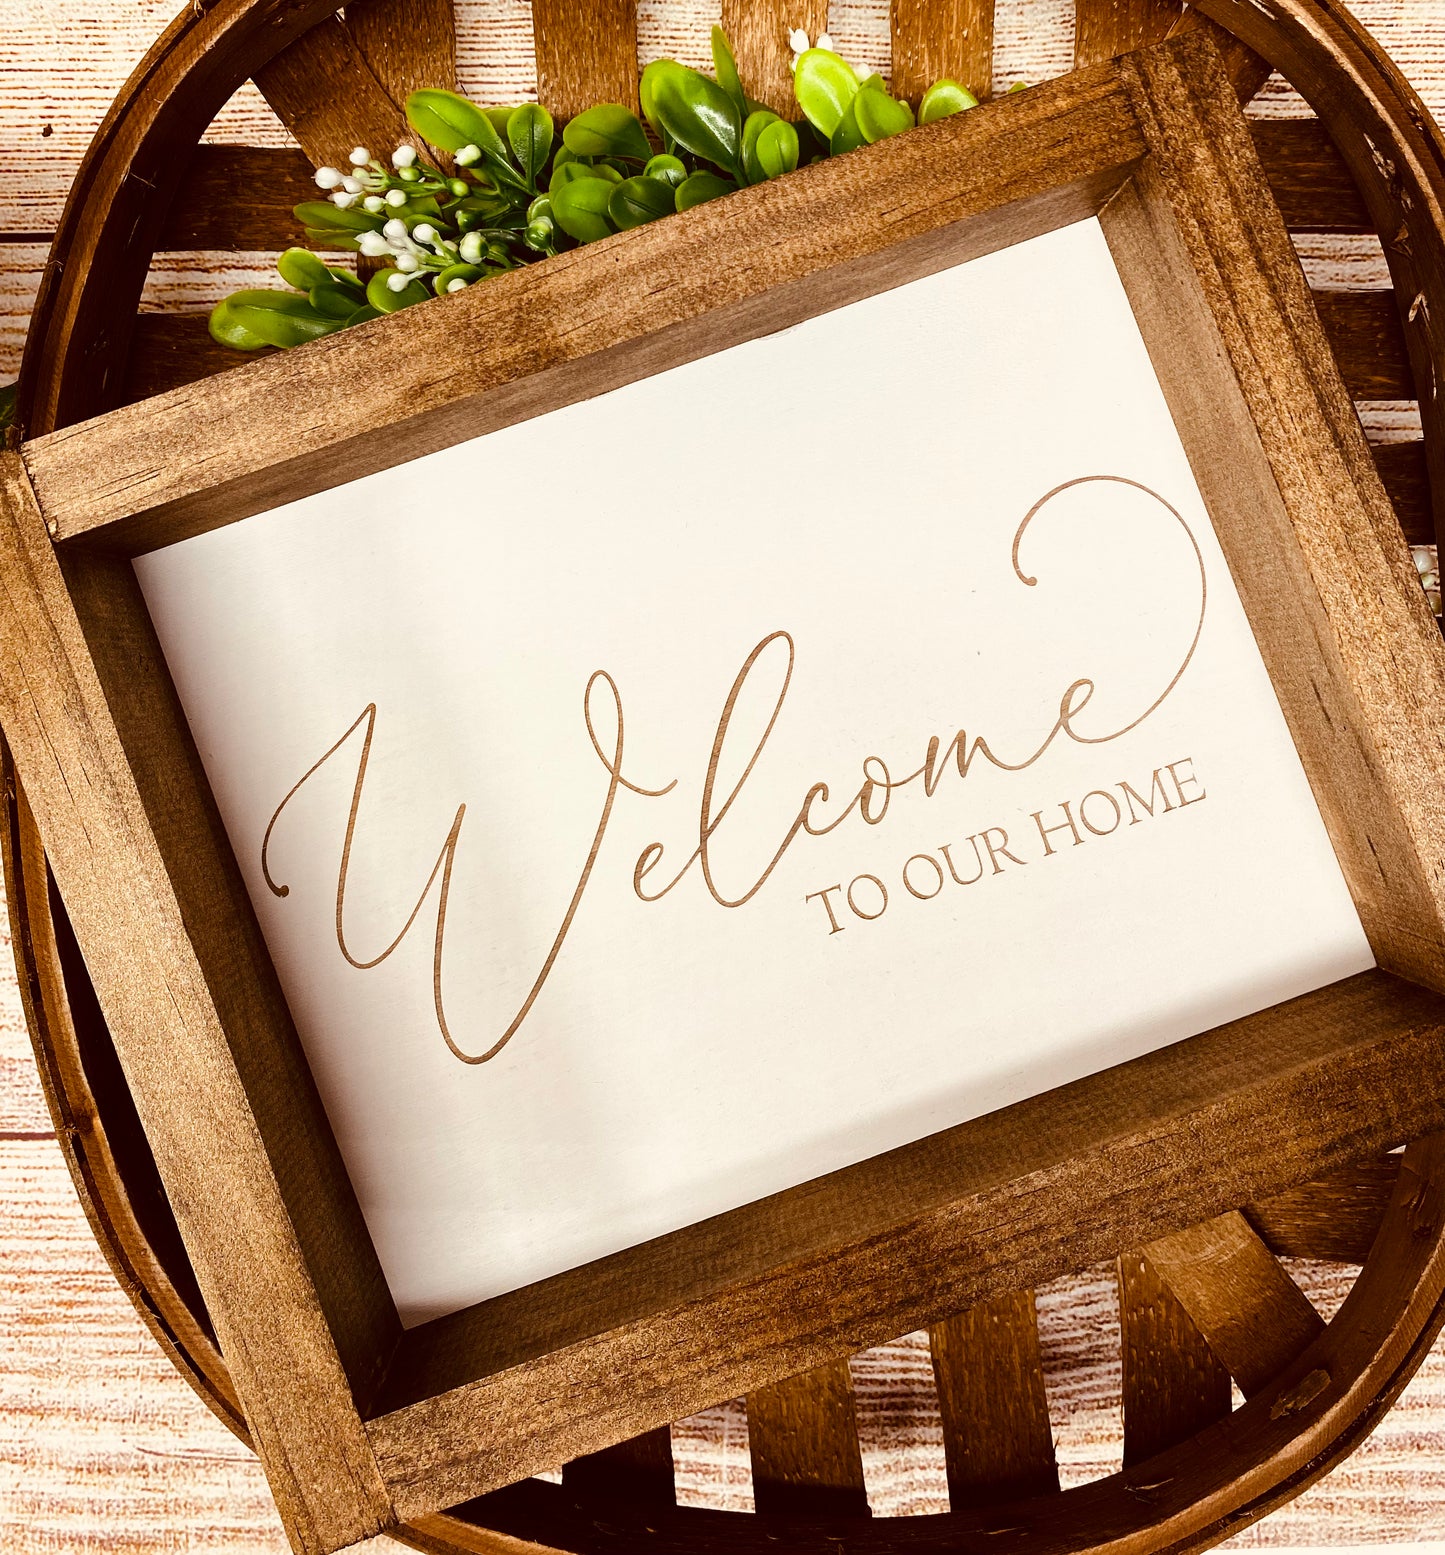 Welcome To Our Home Wood Sign, Laser Engraved Wood Sign, Farmhouse Home Sign